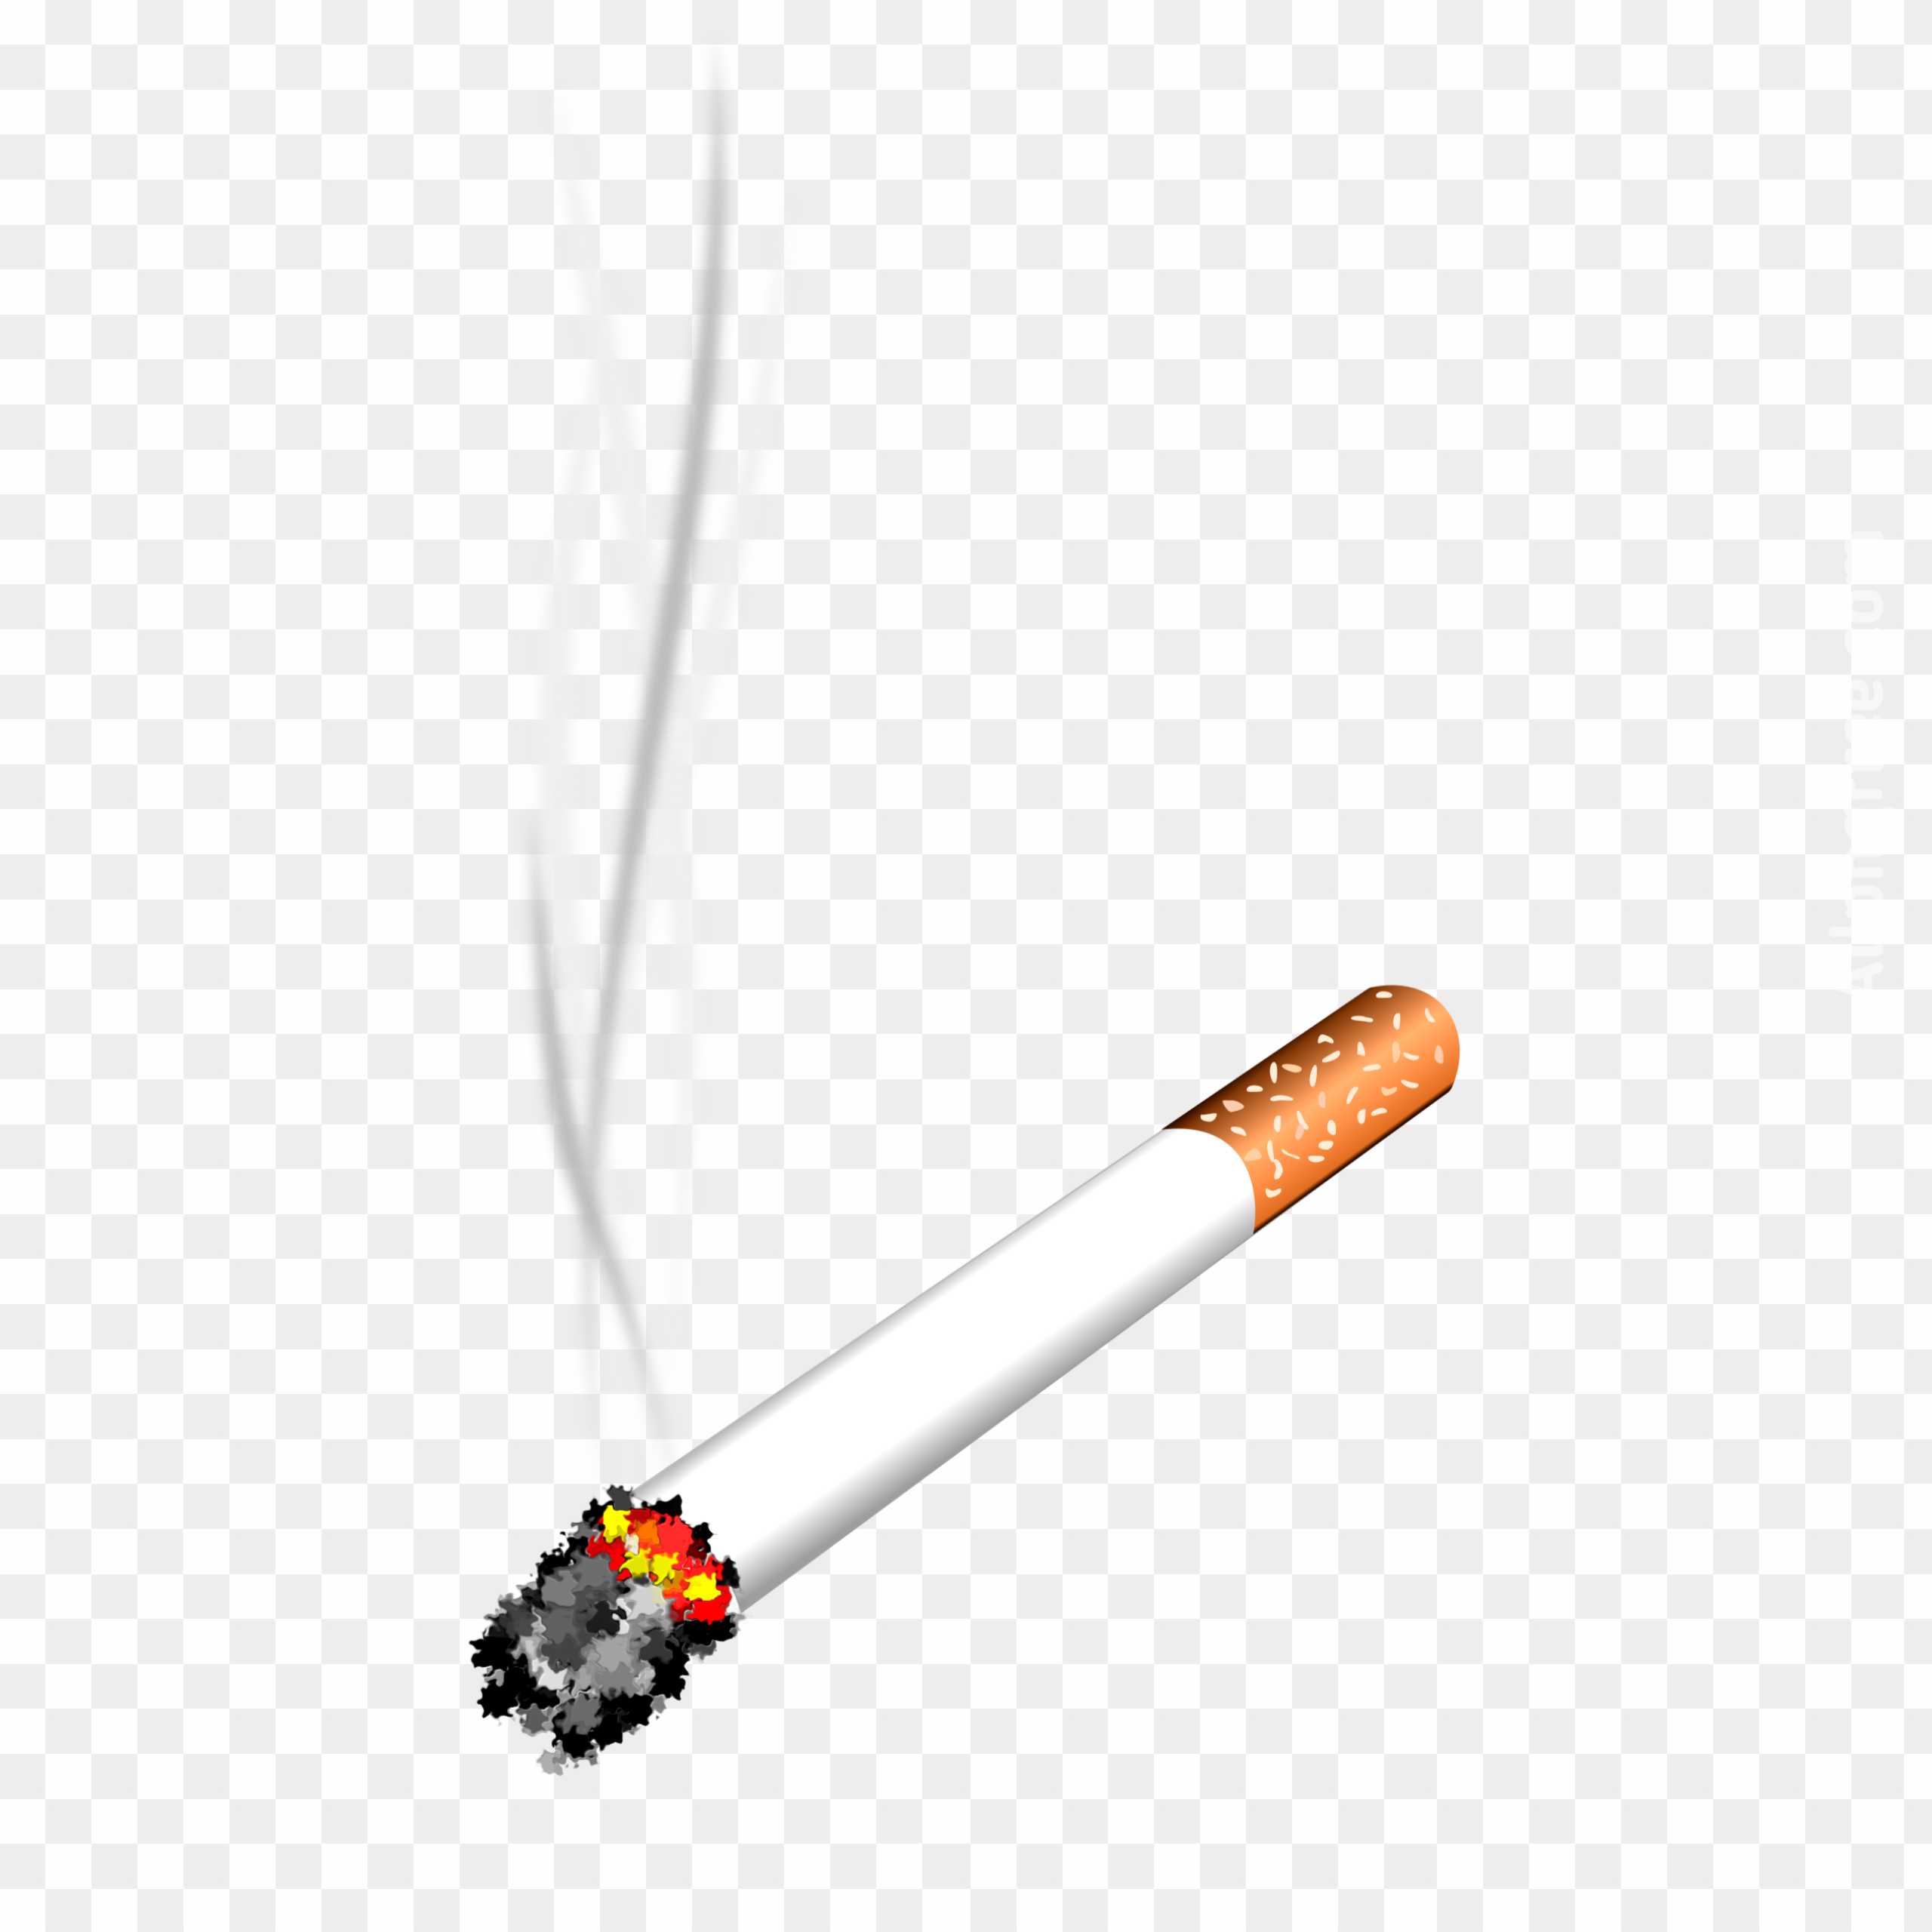 Cigarette with smok PNG images